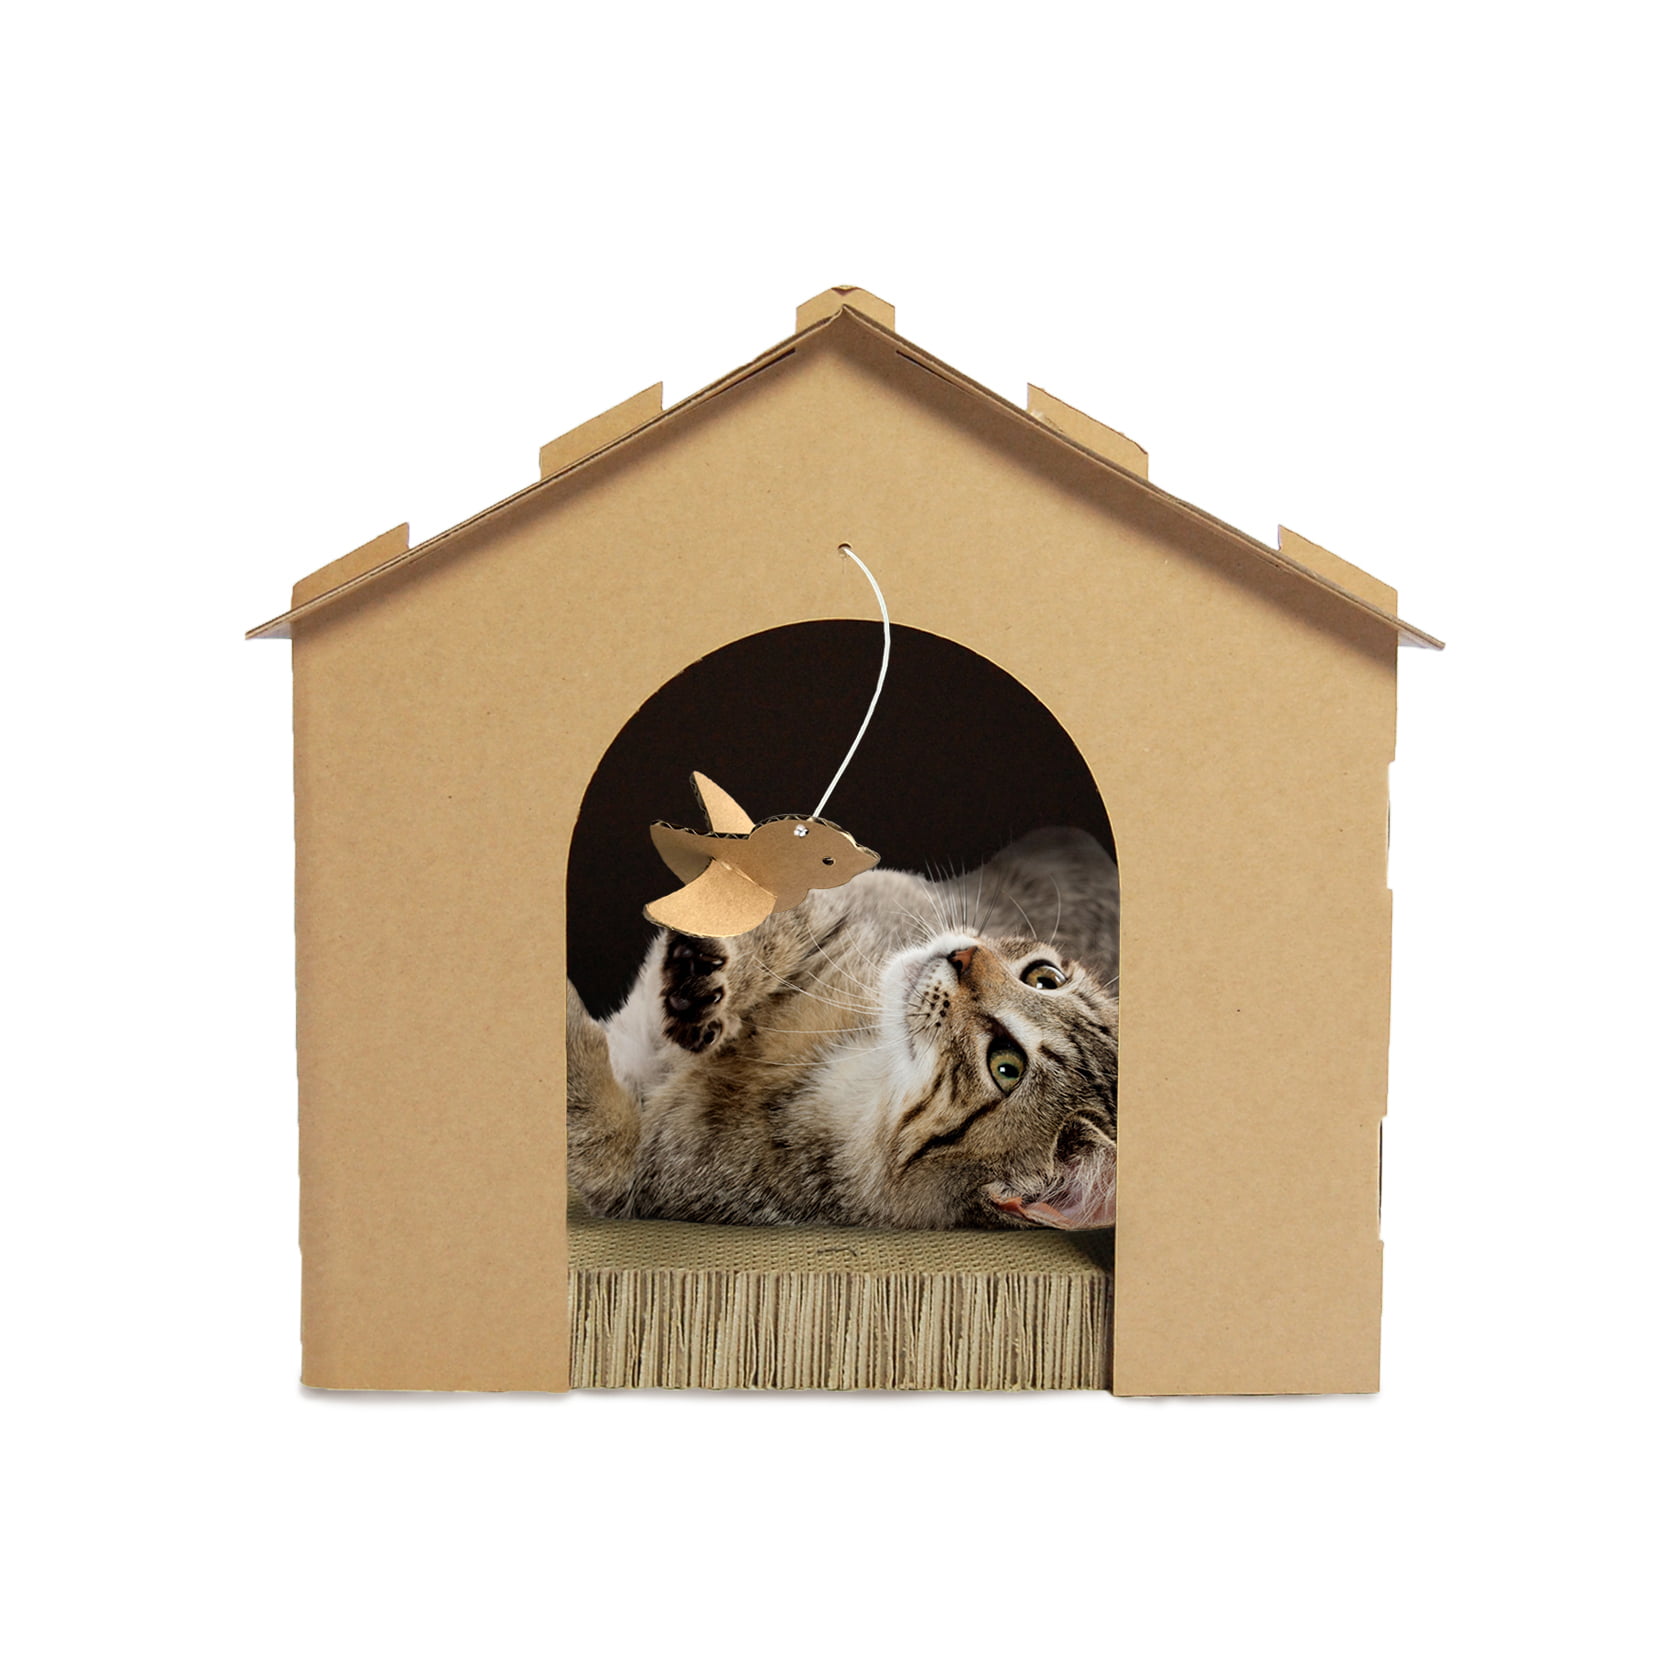 K&H Pet Products Outdoor Cat House, Olive - Walmart.com